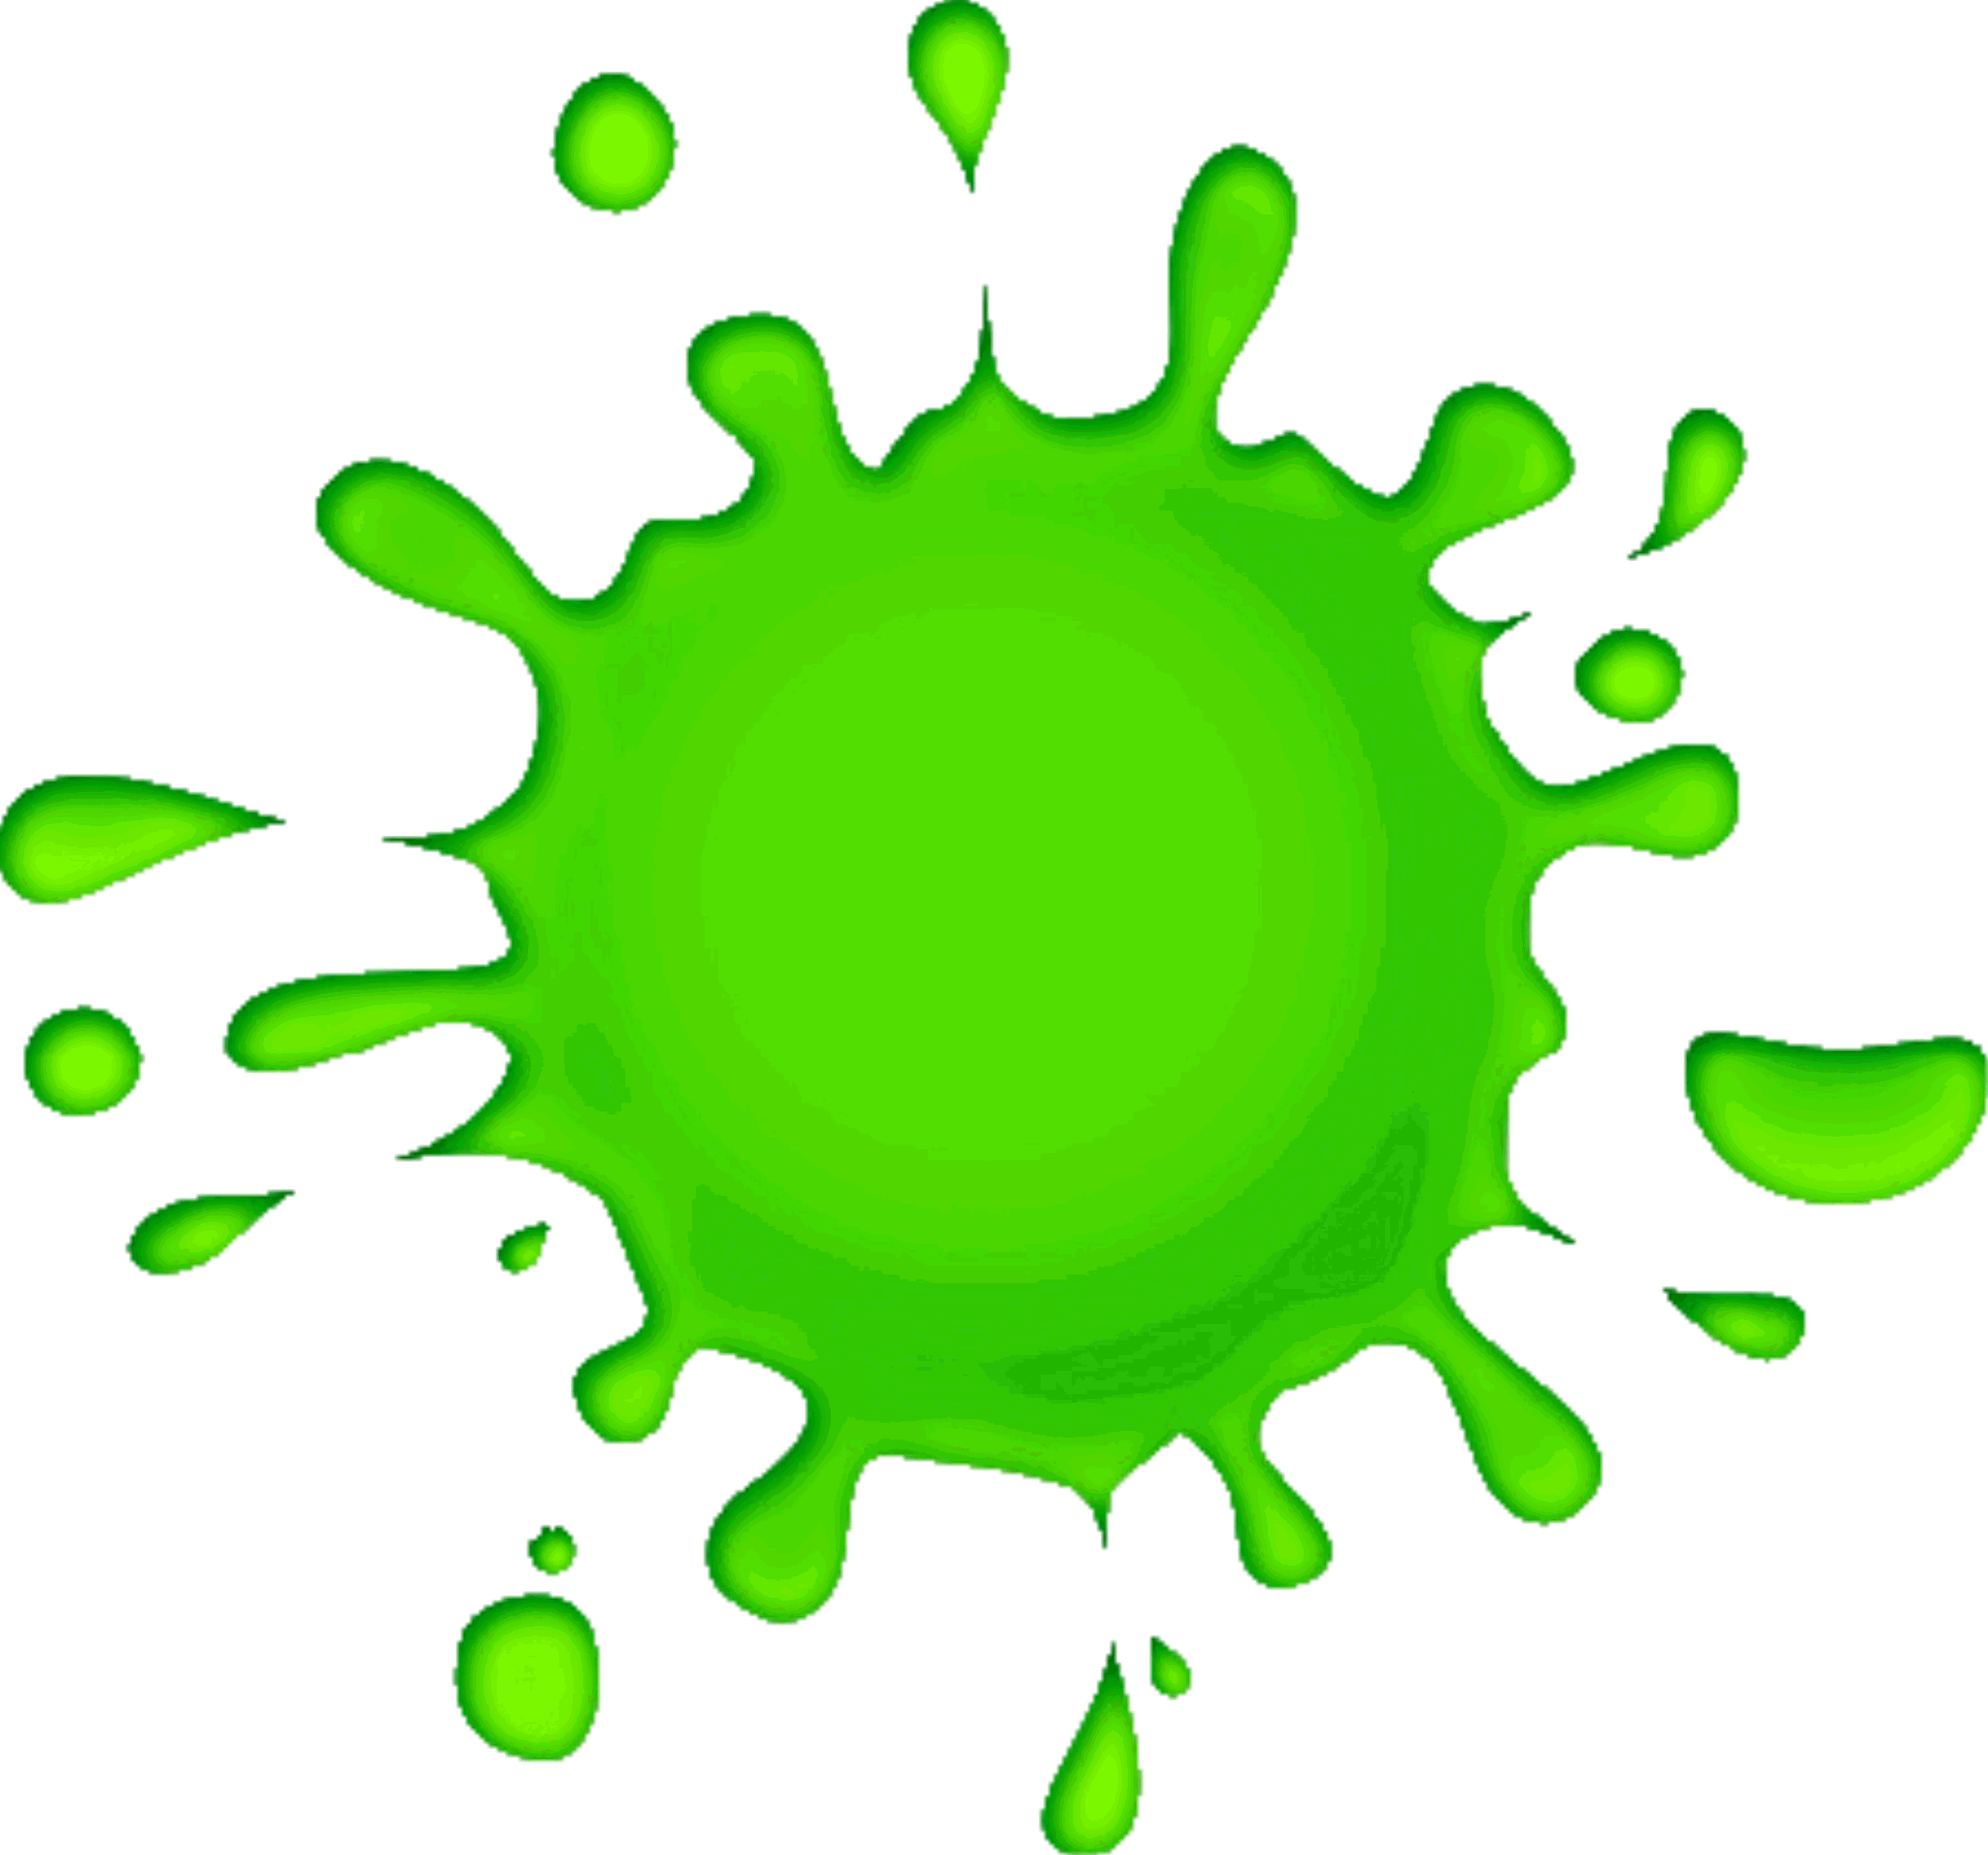 paint splash green - Clipart library - Clipart library